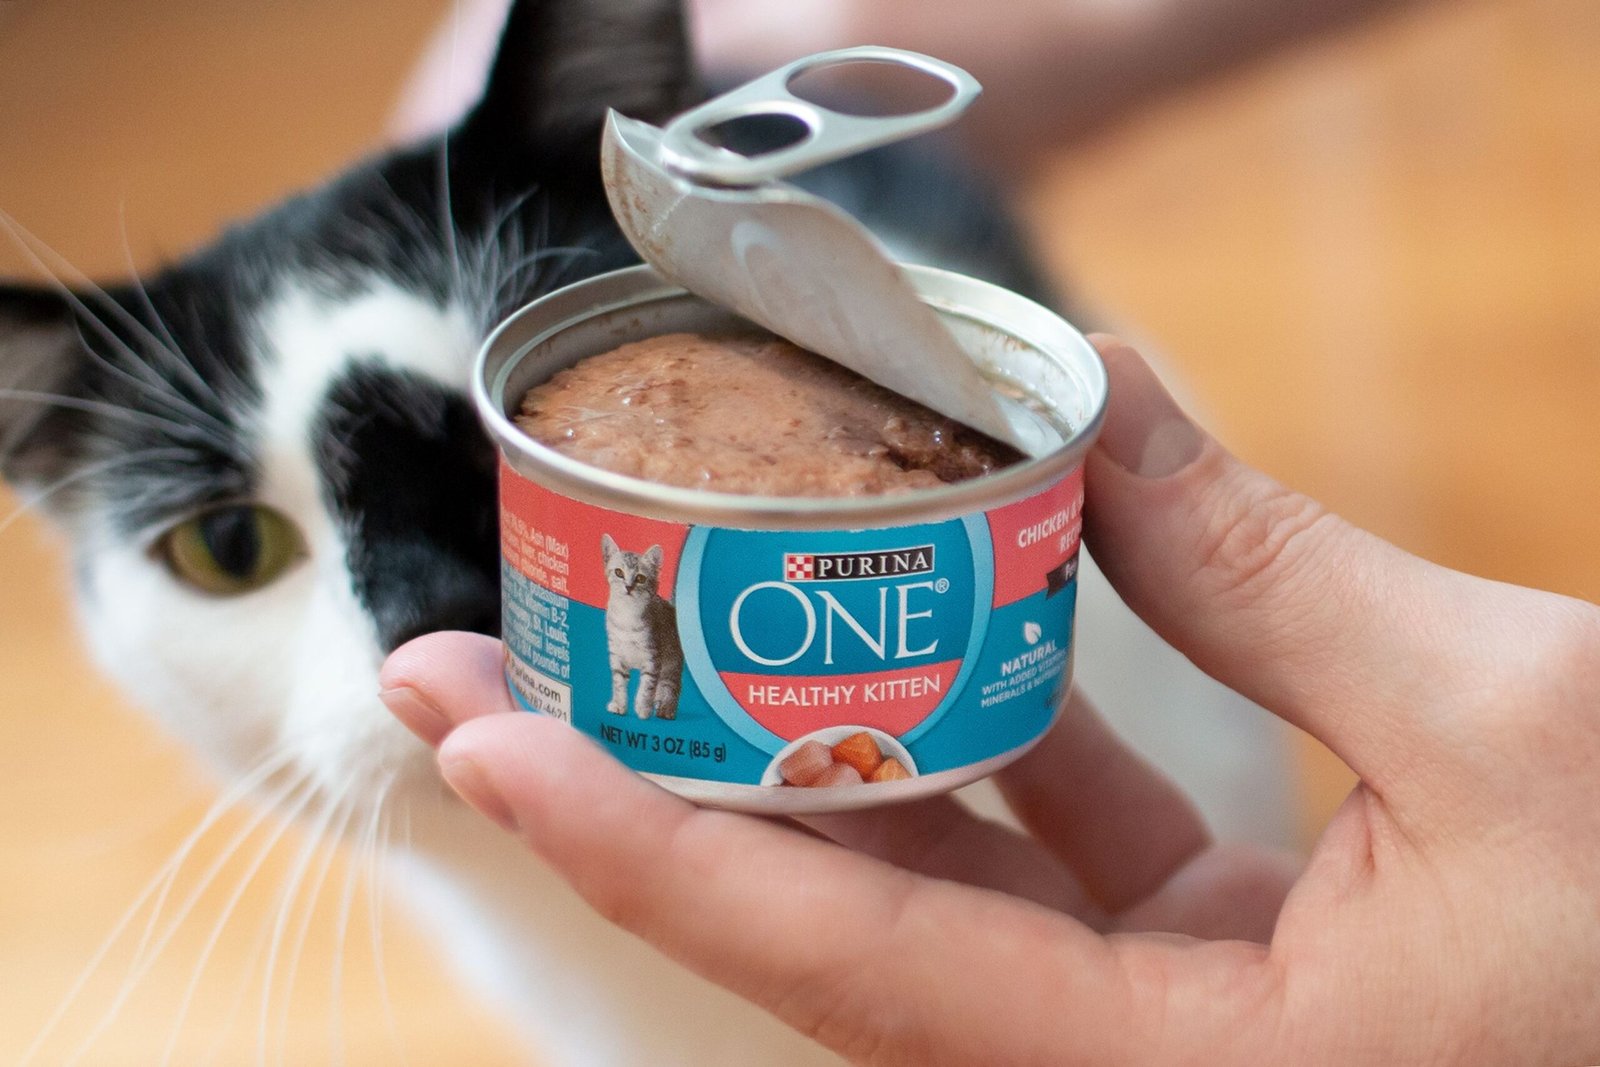 the length of time you can safely leave canned cat food out depends on various factors